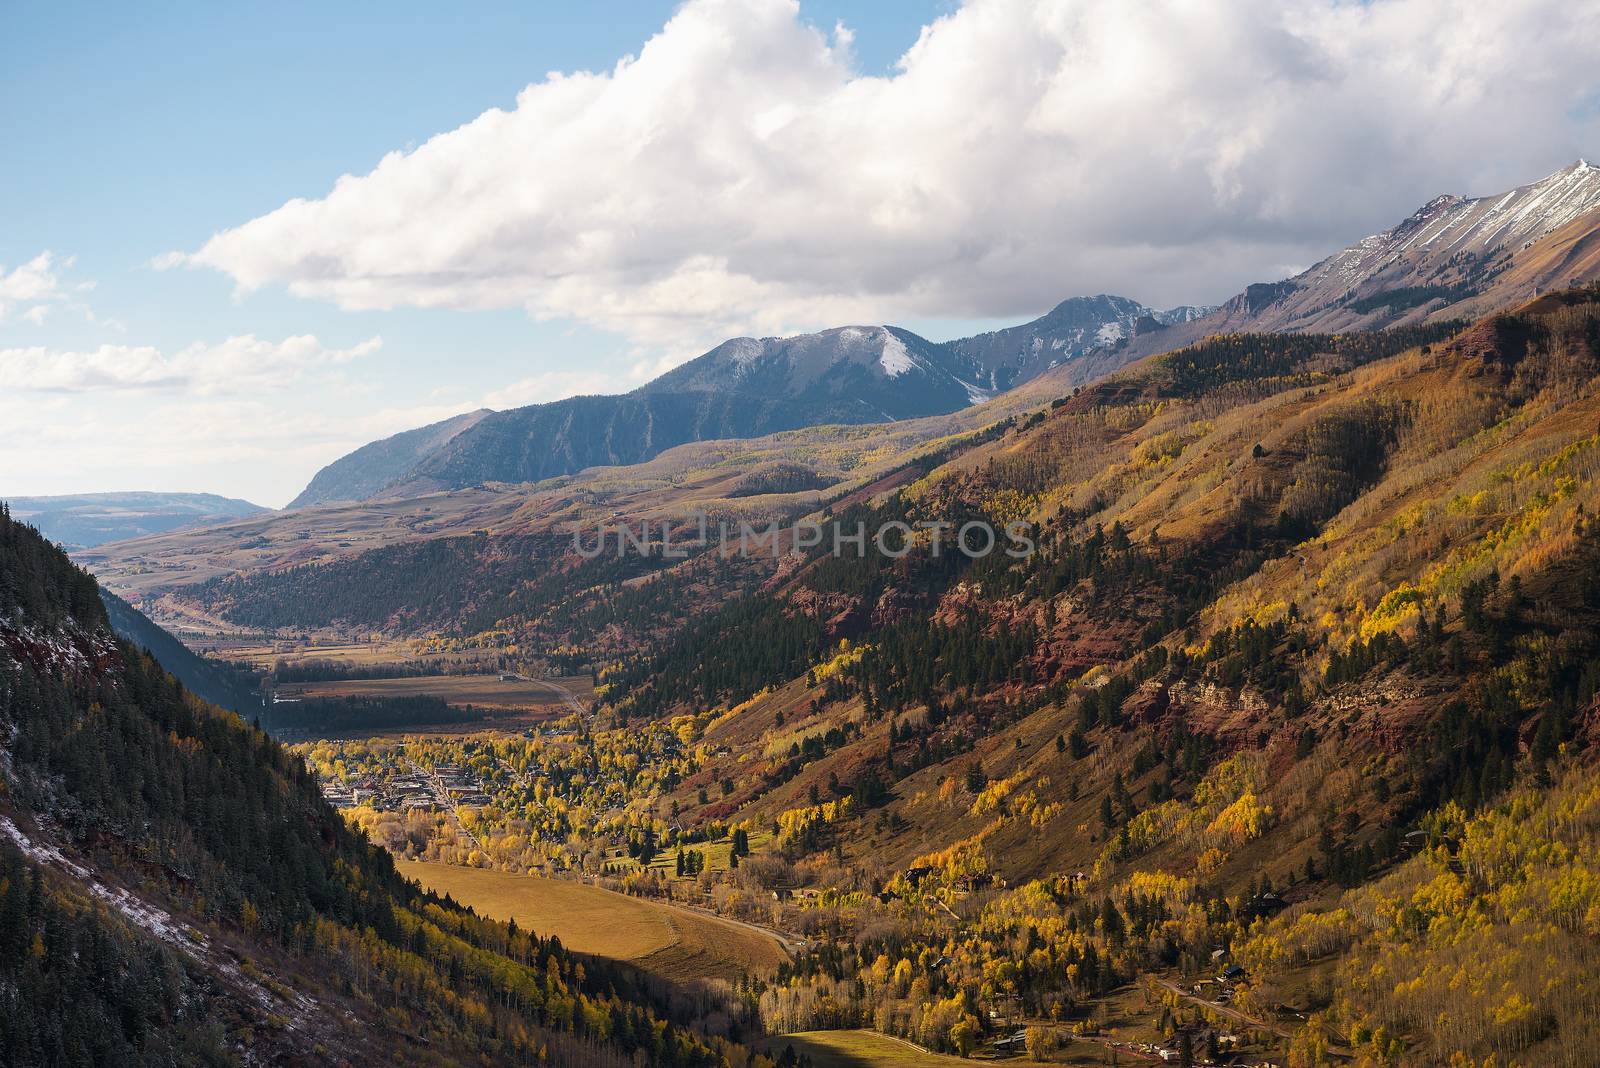 Aerial view of Telluride, Colorado in autumn with surrounding San Juan Mountains. Telluride is a historic mining town and popular ski resort.